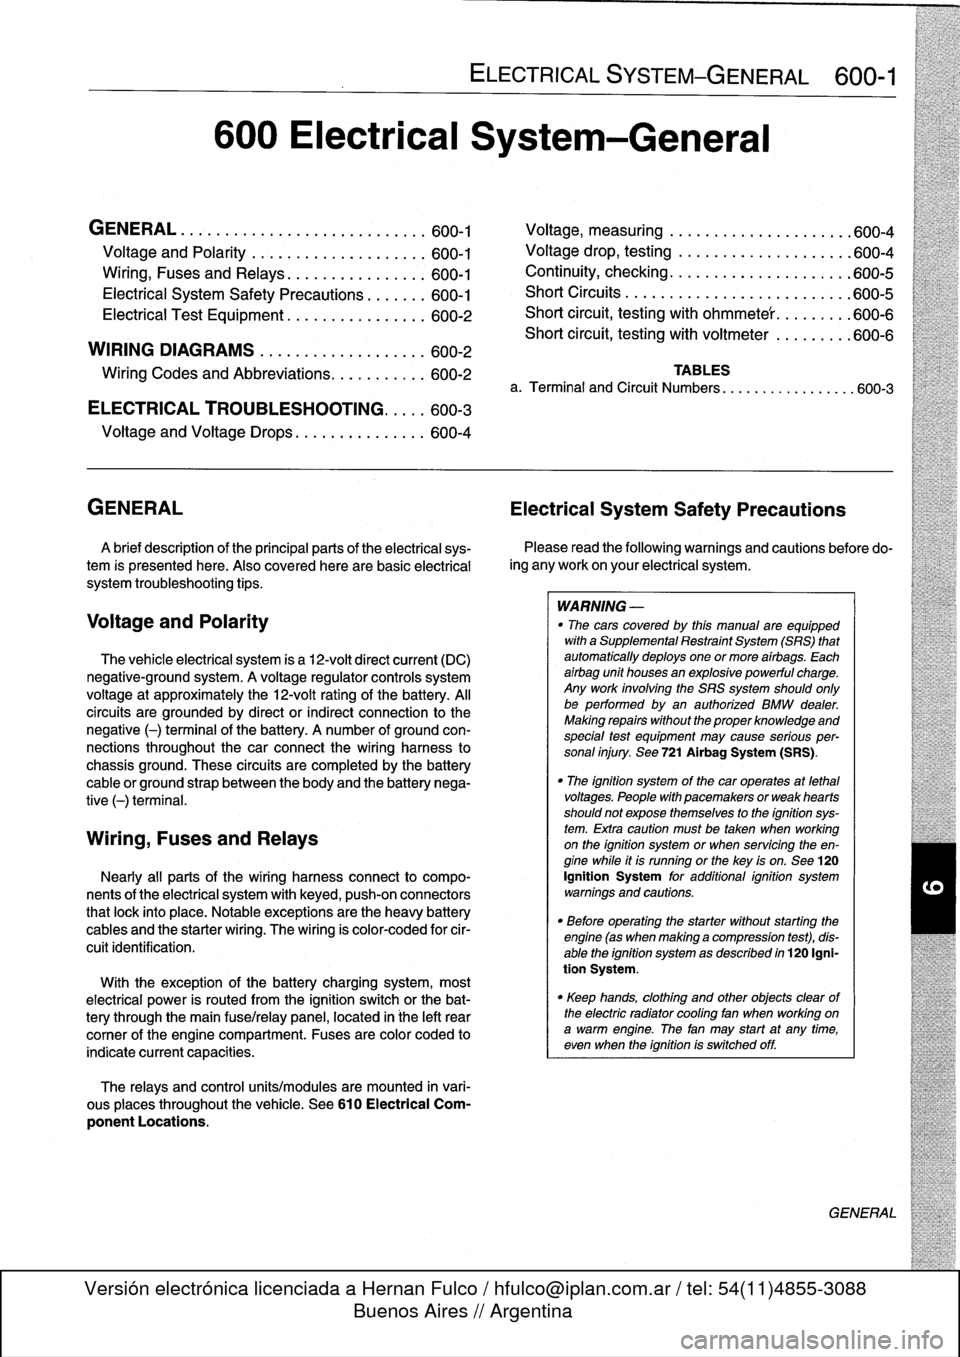 BMW 323i 1998 E36 Workshop Manual 
600
Electrical
System-General

GENERAL
.
...........
.
.
.
.
.
.
.
.
.
...
.
...
600-1

Voltage
and
Polarity
........
.
.
.
.
.
.
.
.....
600-1

Ming,
Fuses
and
Relays
............
.
.
.
.
600-1

Ele